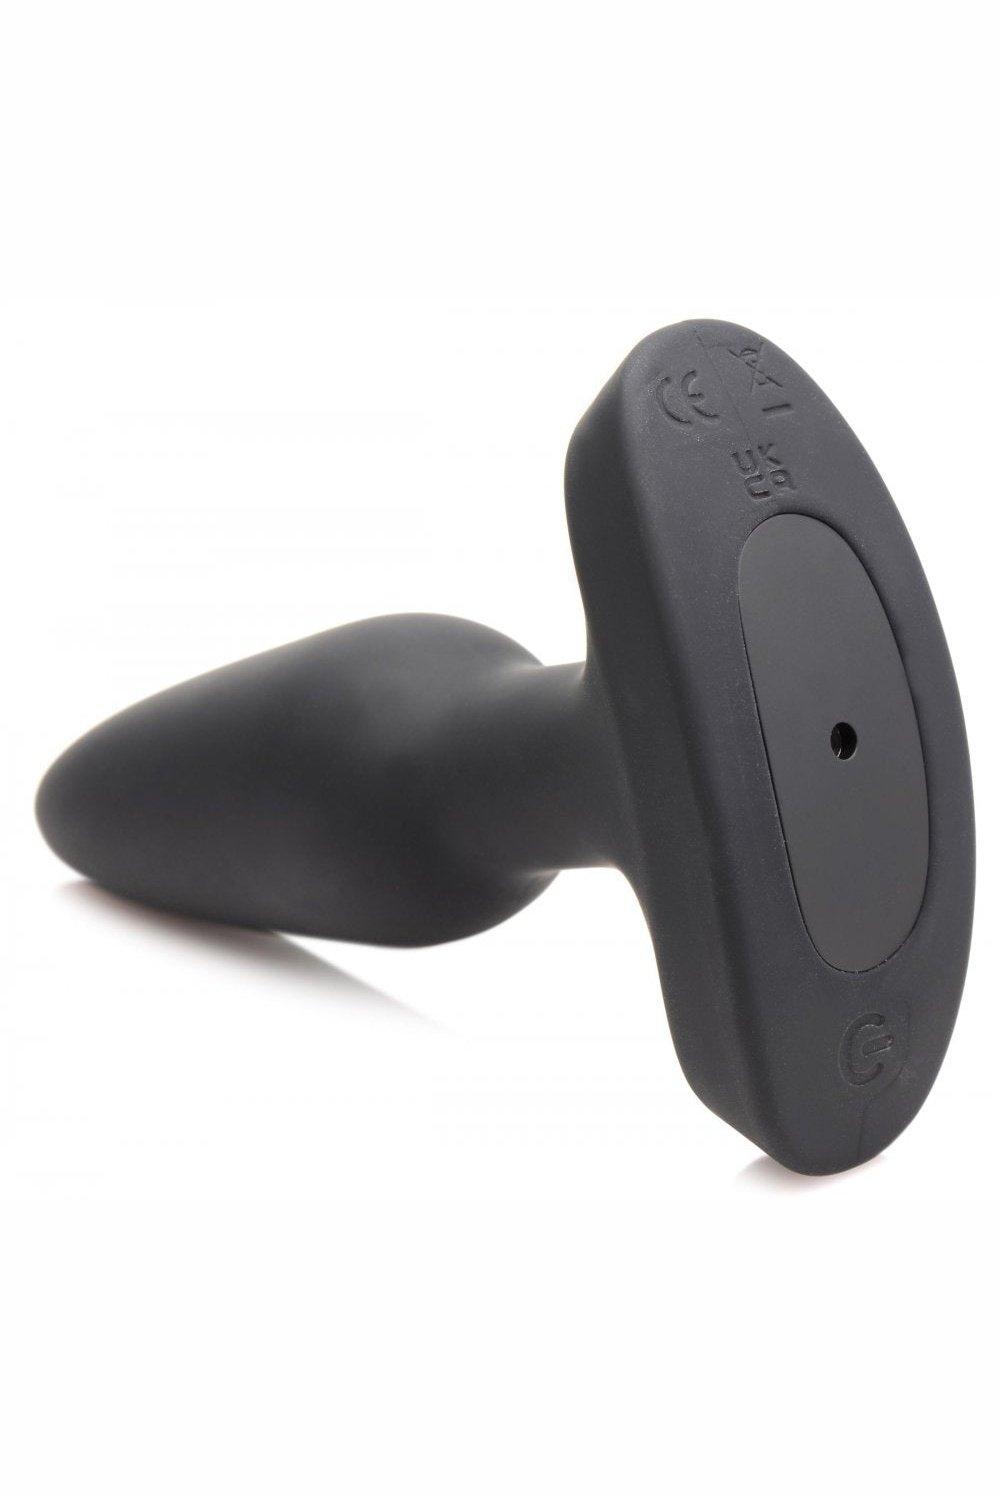 28X Laser Fuck Me Silicone Anal Plug with Remote Control - Small - Sex On the Go